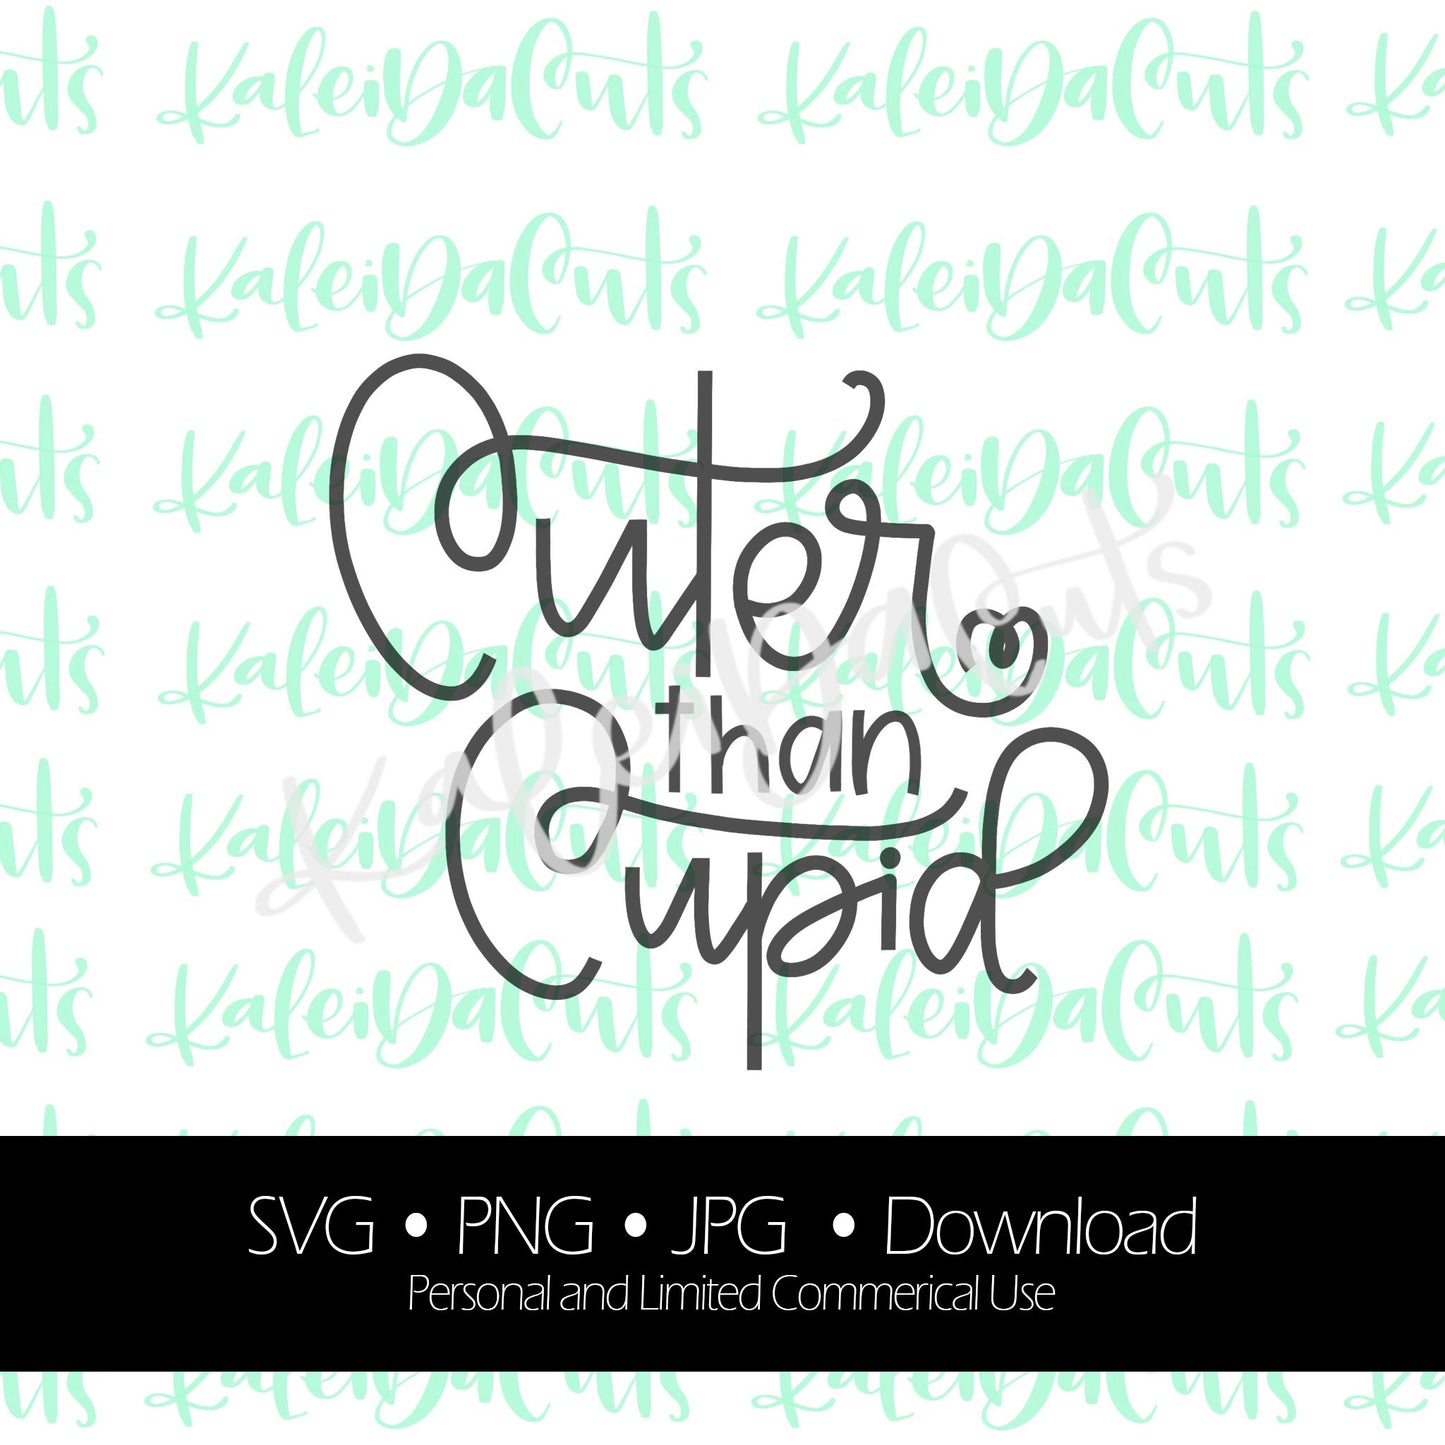 Cuter than Cupid Digital Download. SVG. Personal and Limited Commercial Use.